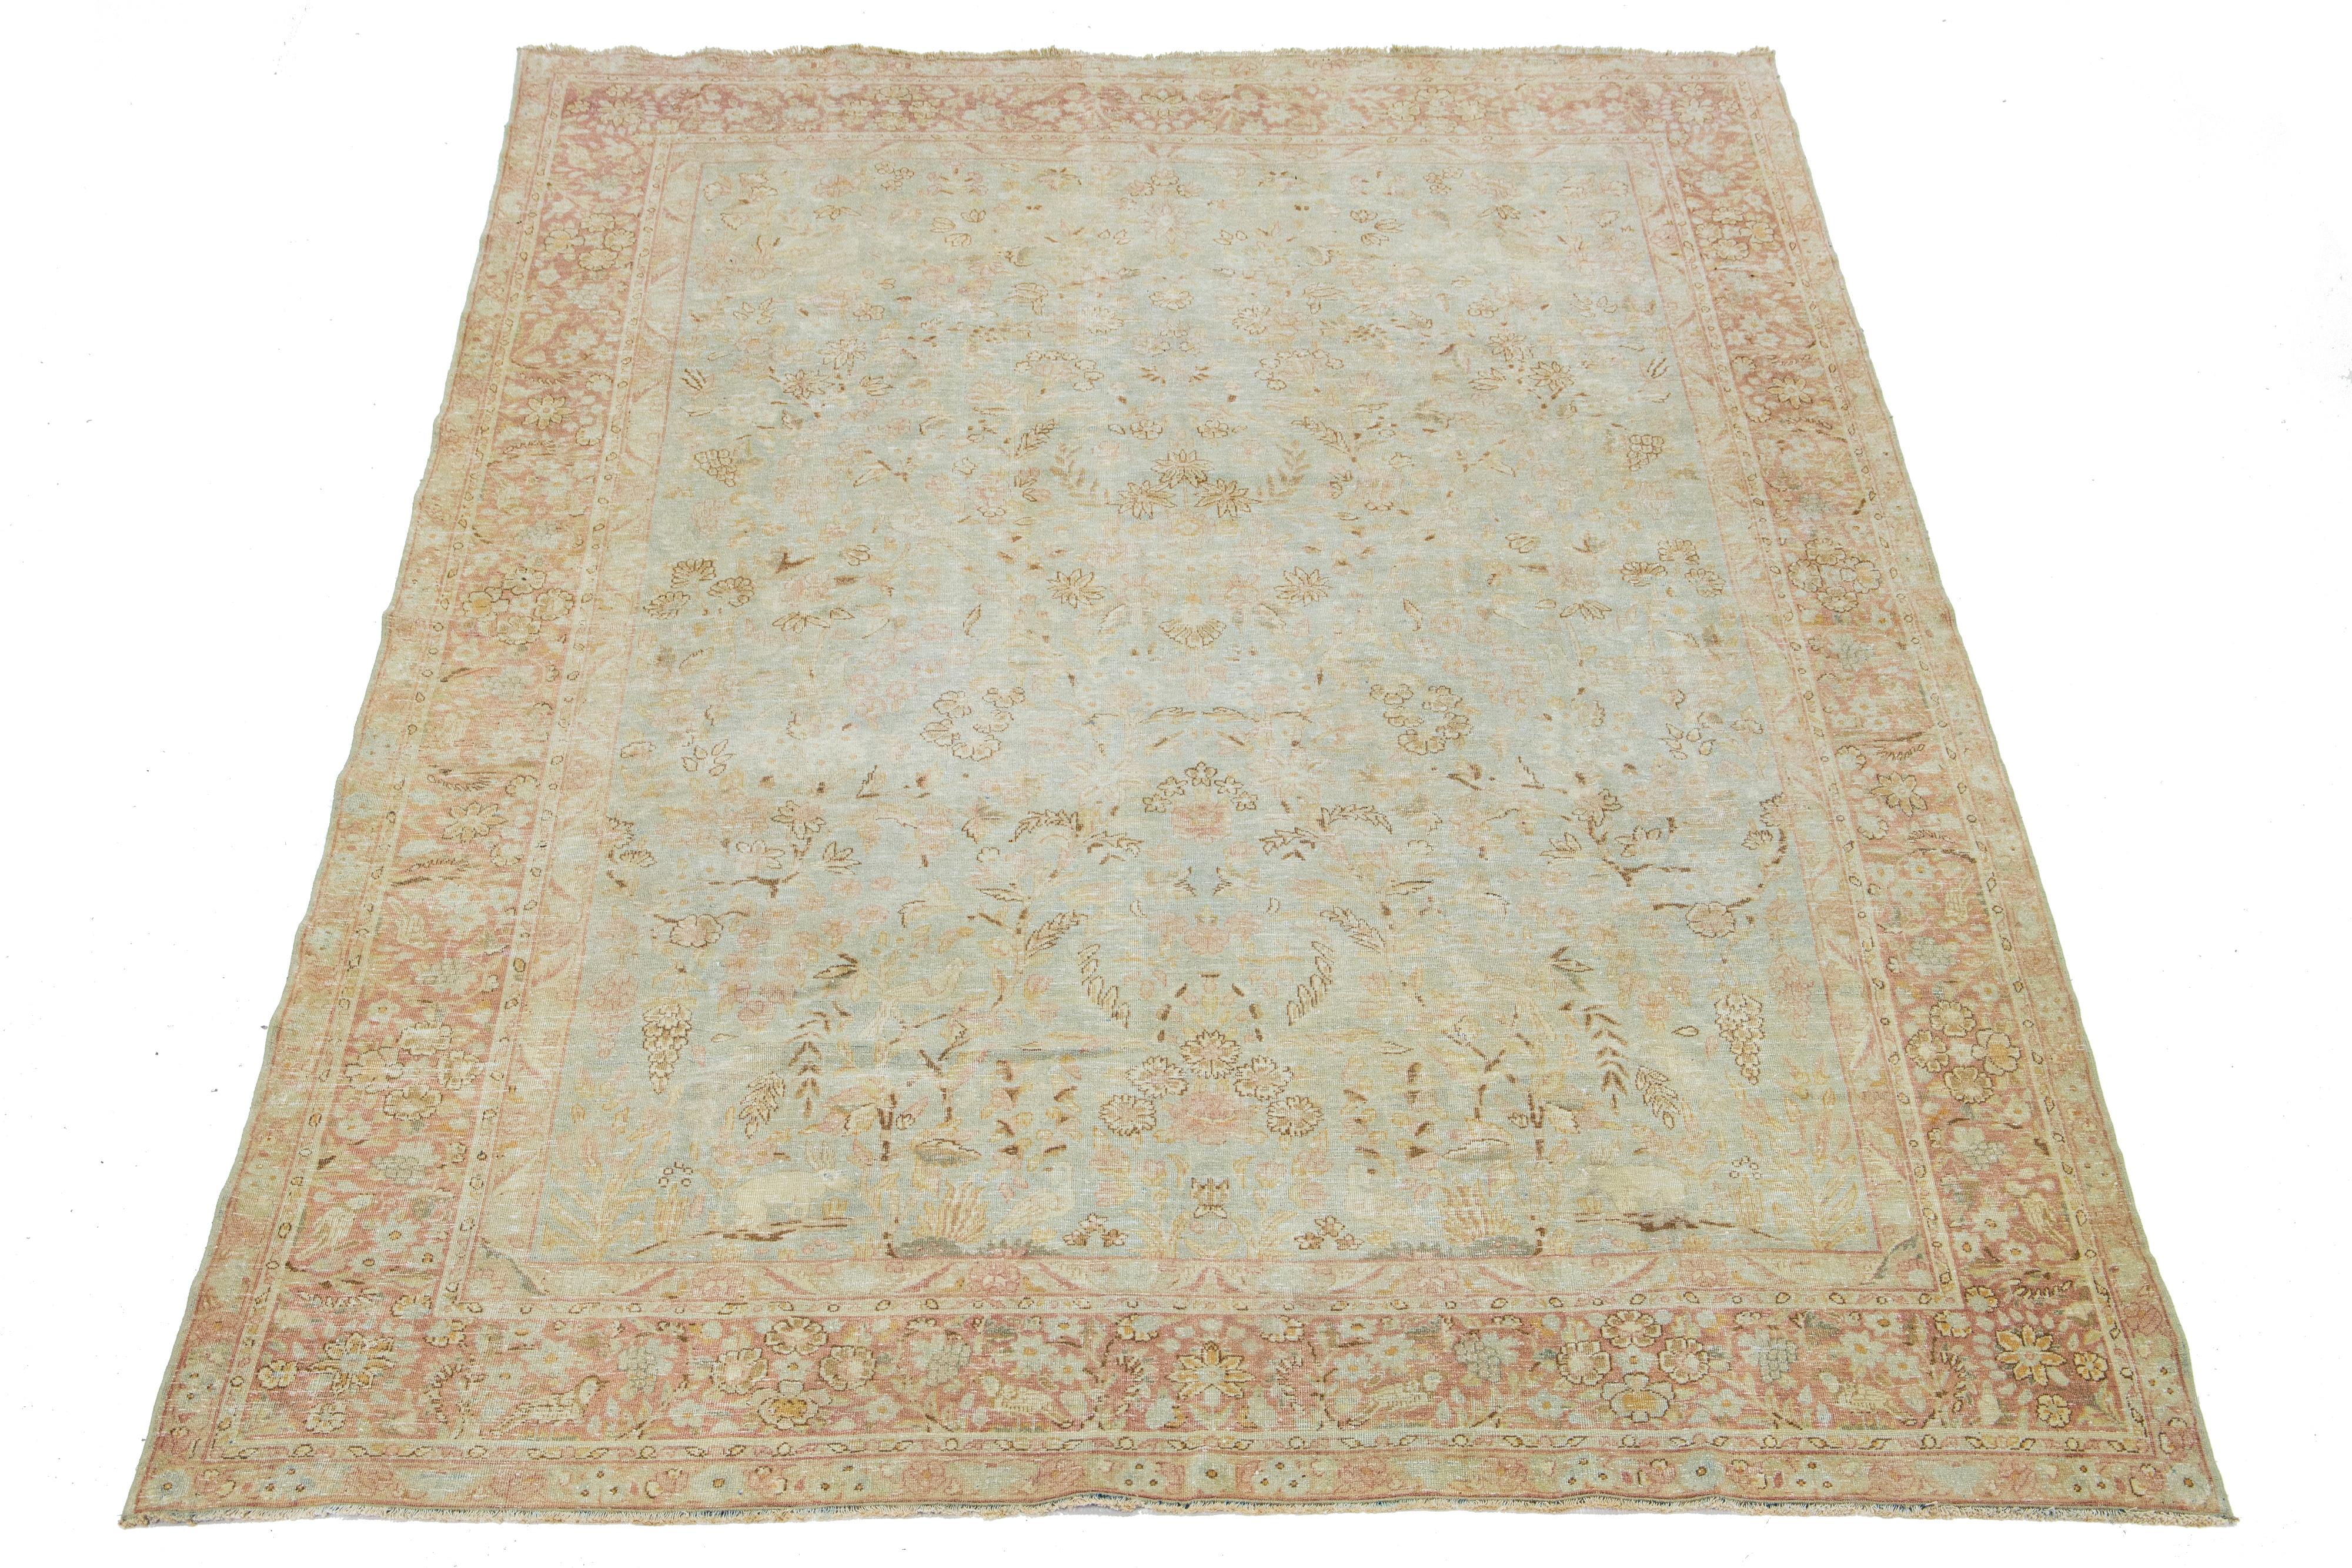 This hand-knotted wool rug from Malyer features a delightful antique finish. The rug has a light blue field embellished with an exquisite all-over floral pattern, accented by touches of deep brown and rust—showcasing the impressive craft of Persian